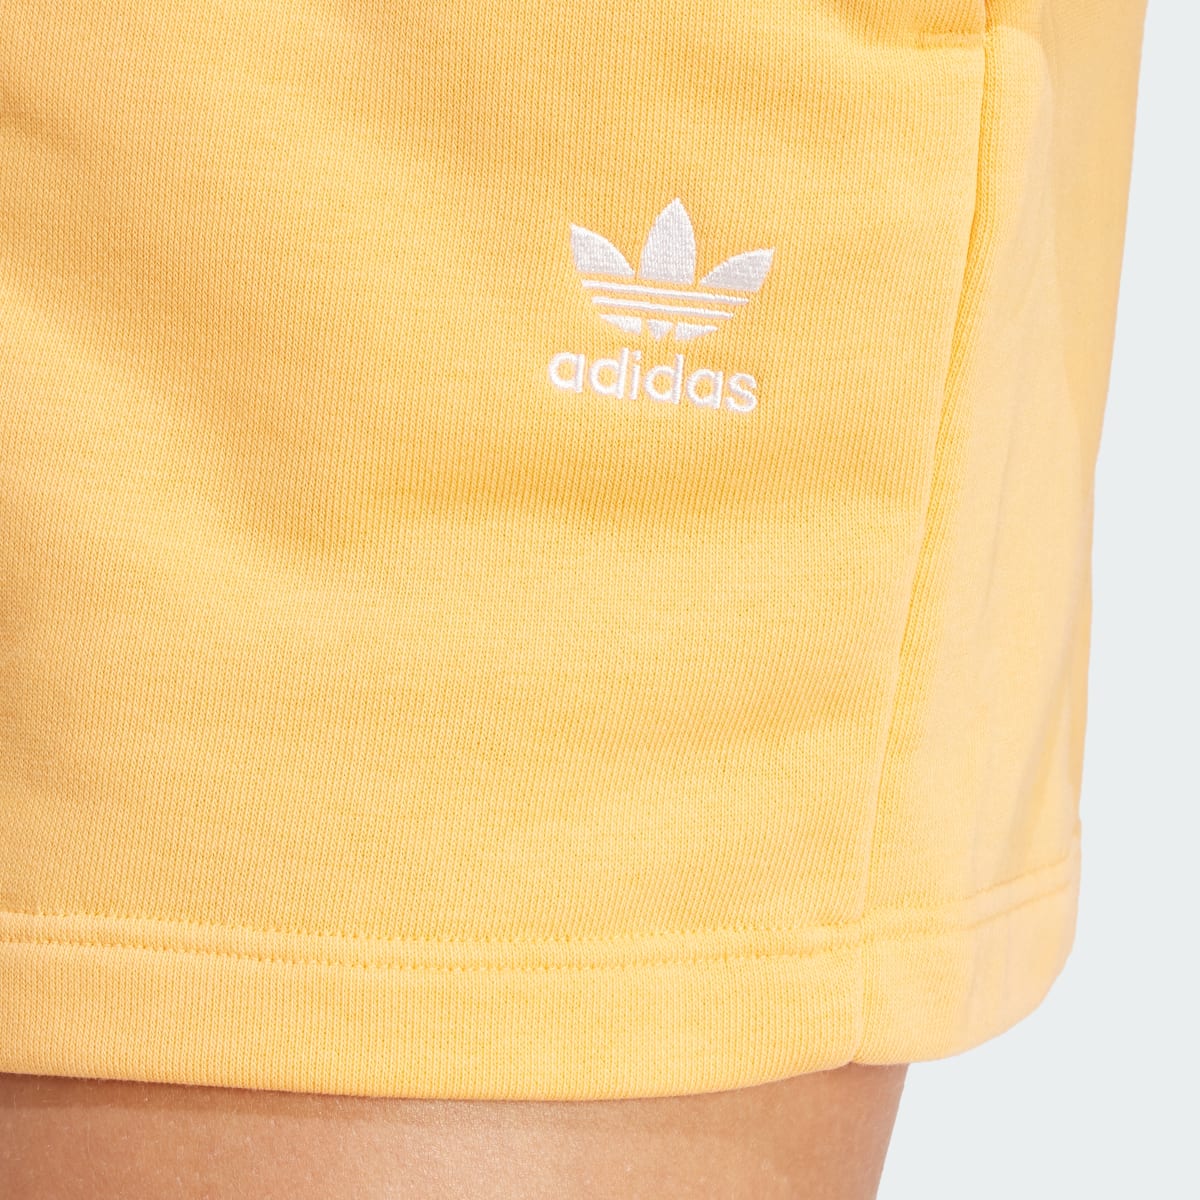 Adidas Adicolor Essentials French Terry Shorts. 5